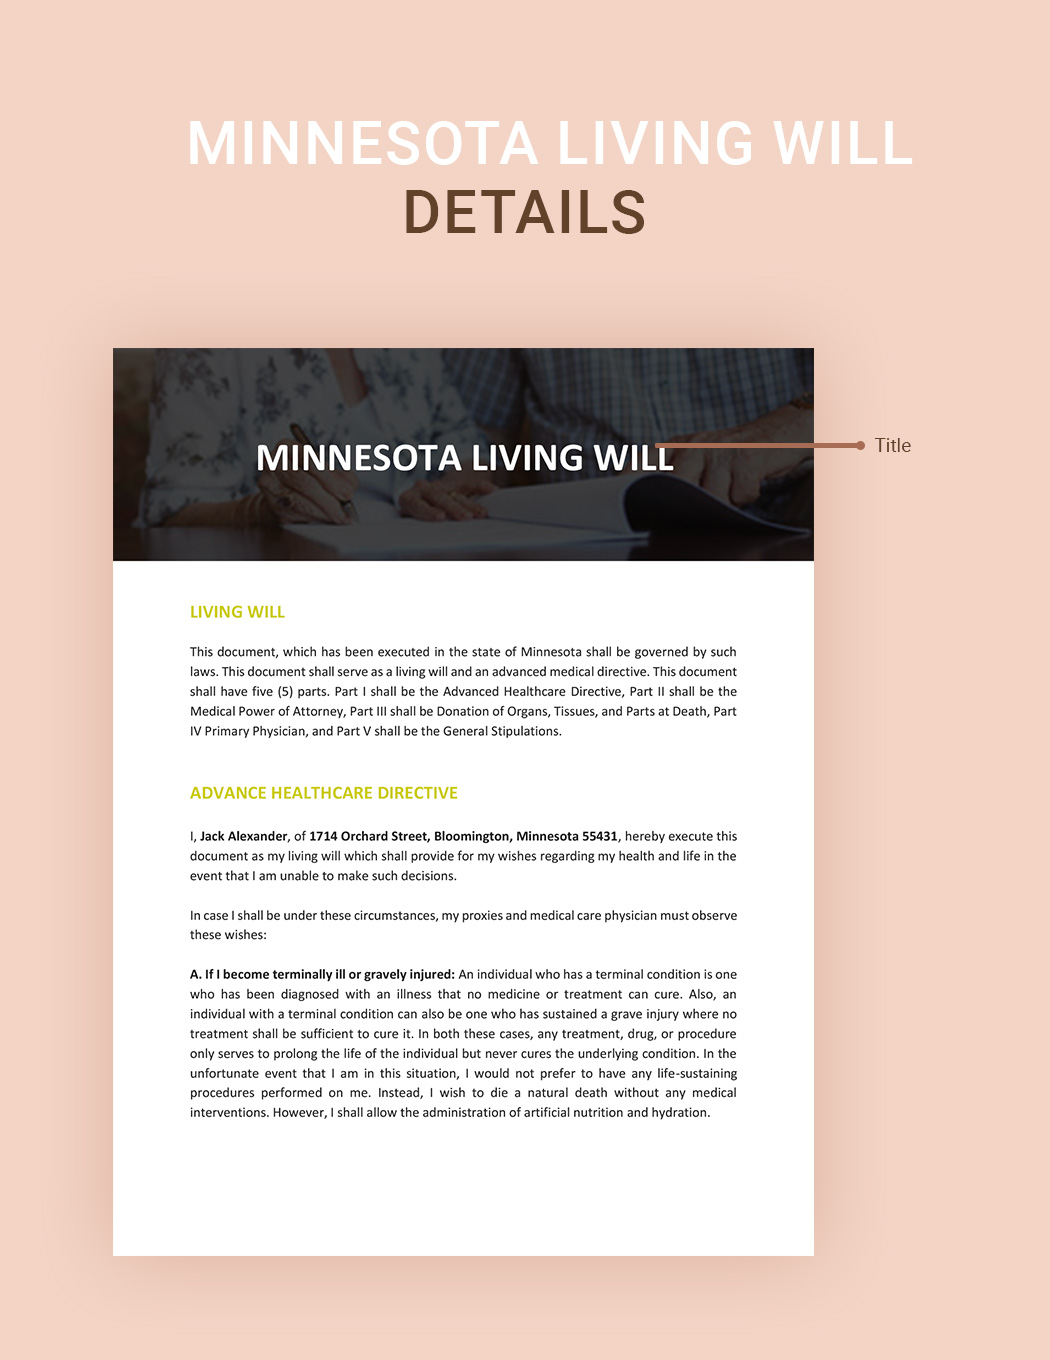 Minnesota Living Will Template Download in Word, Google Docs